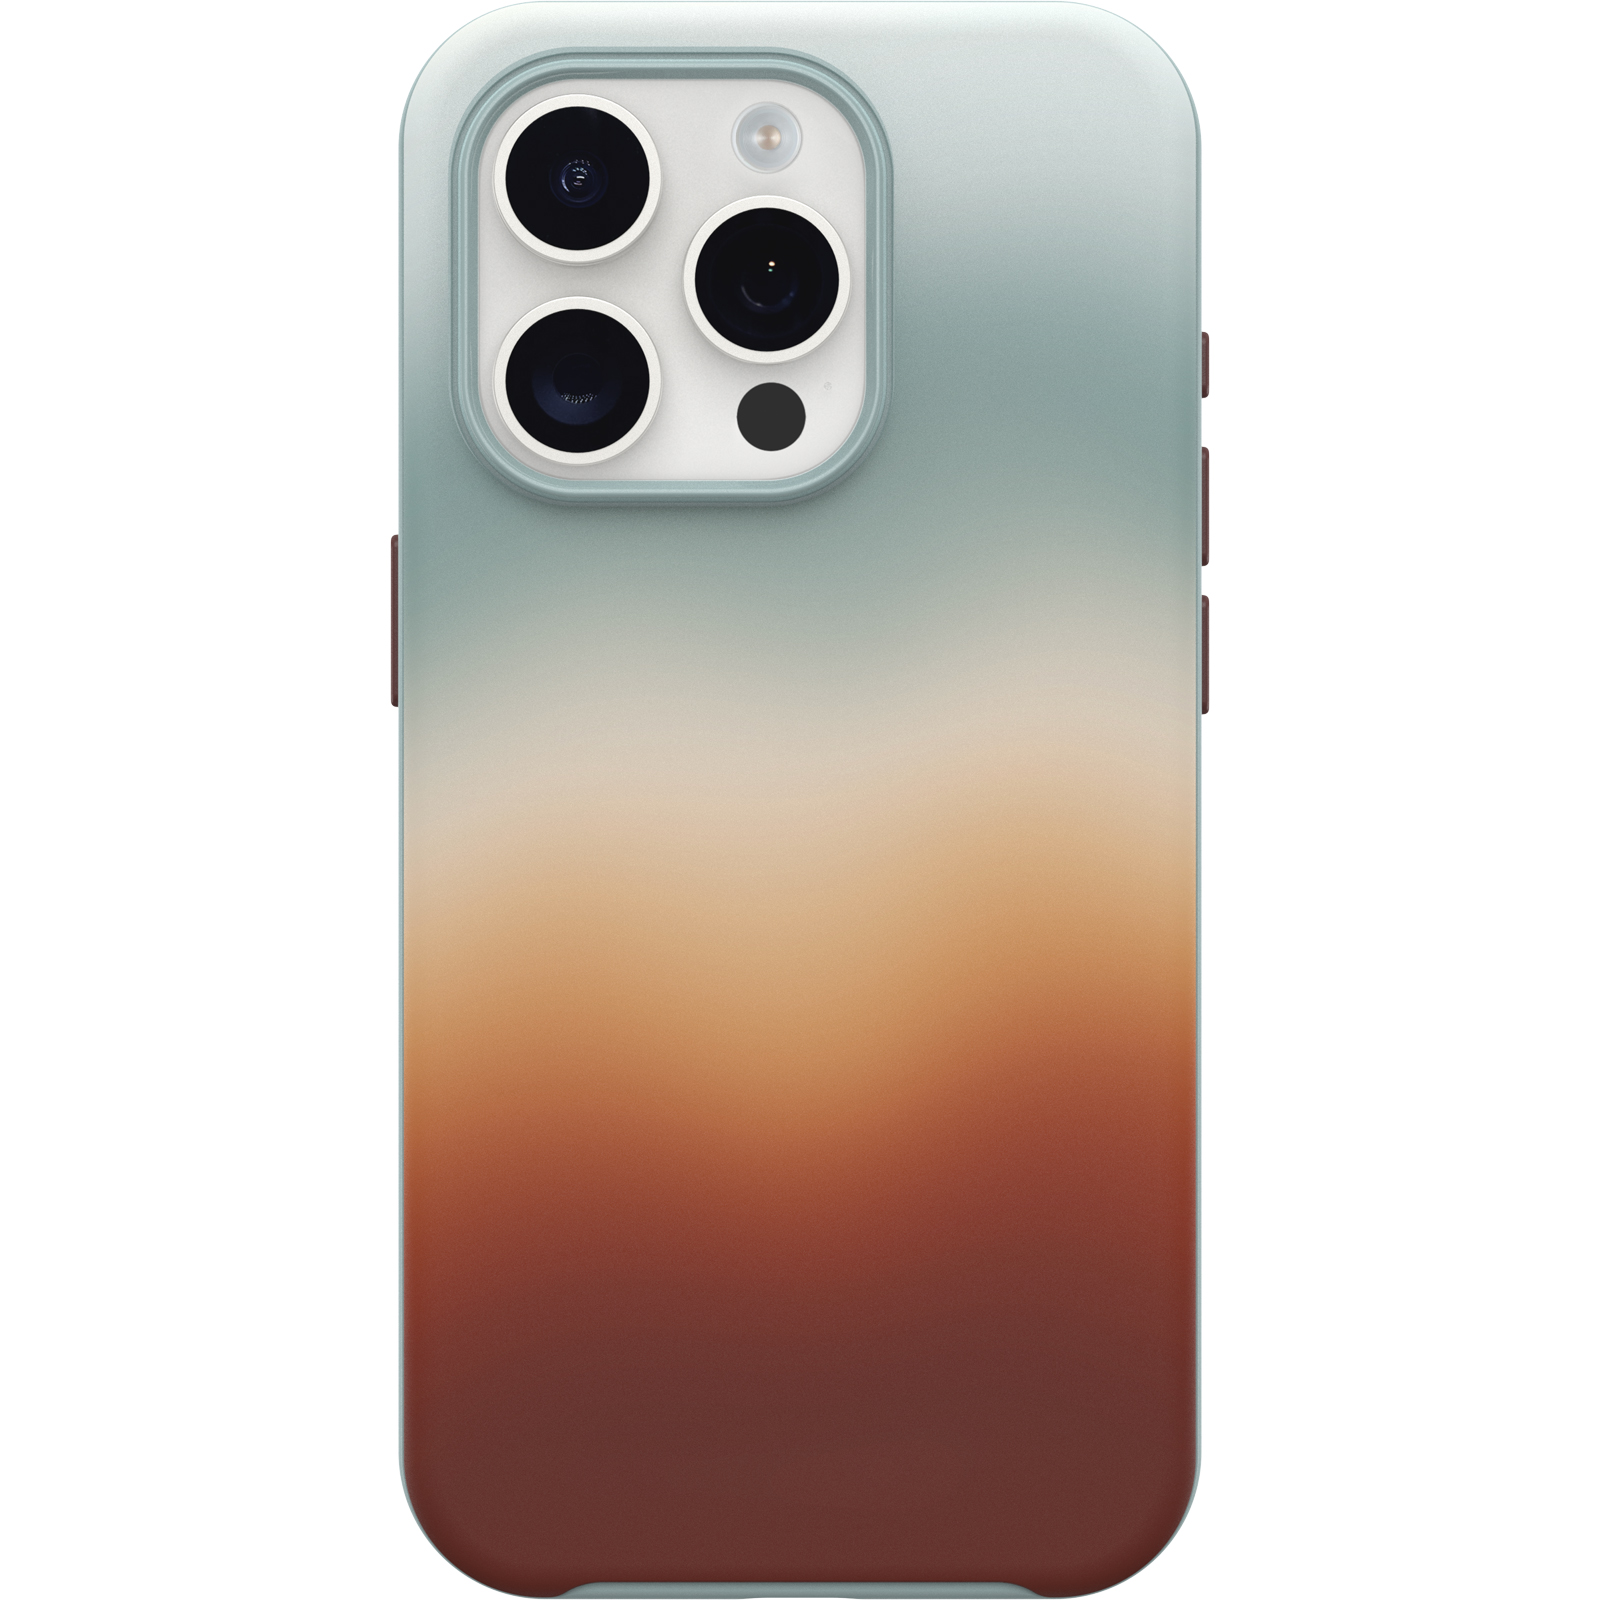  OtterBox iPhone 15 Pro (Only) Symmetry Series Clear Case - DAWN  FLORAL (Blue), snaps to MagSafe, ultra-sleek, raised edges protect camera &  screen : Cell Phones & Accessories